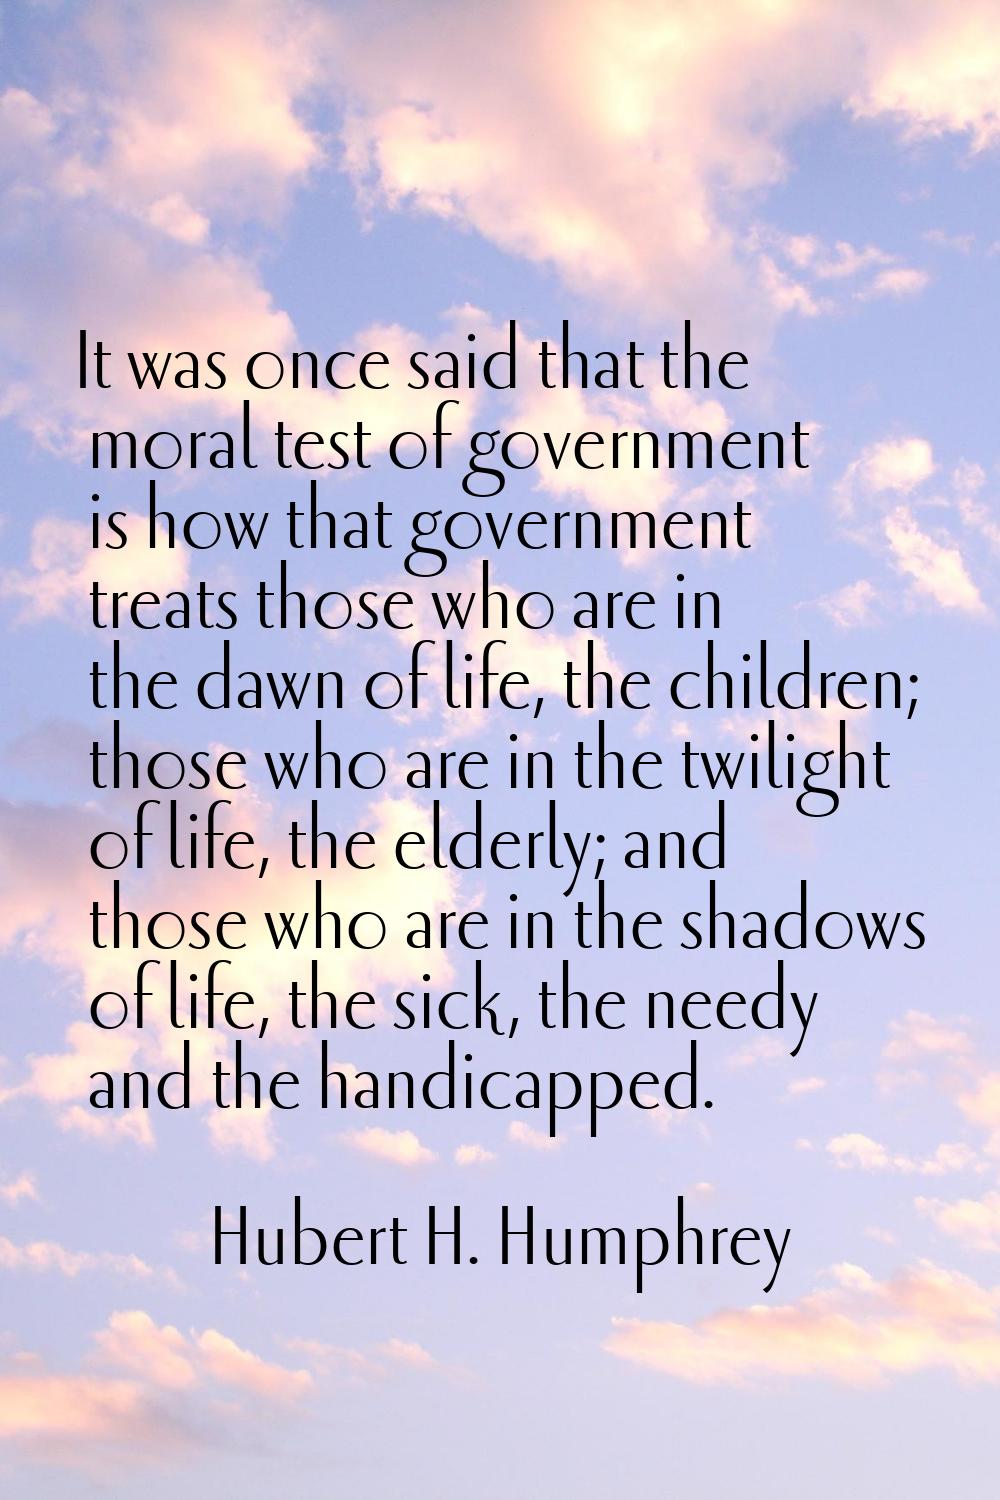 It was once said that the moral test of government is how that government treats those who are in t